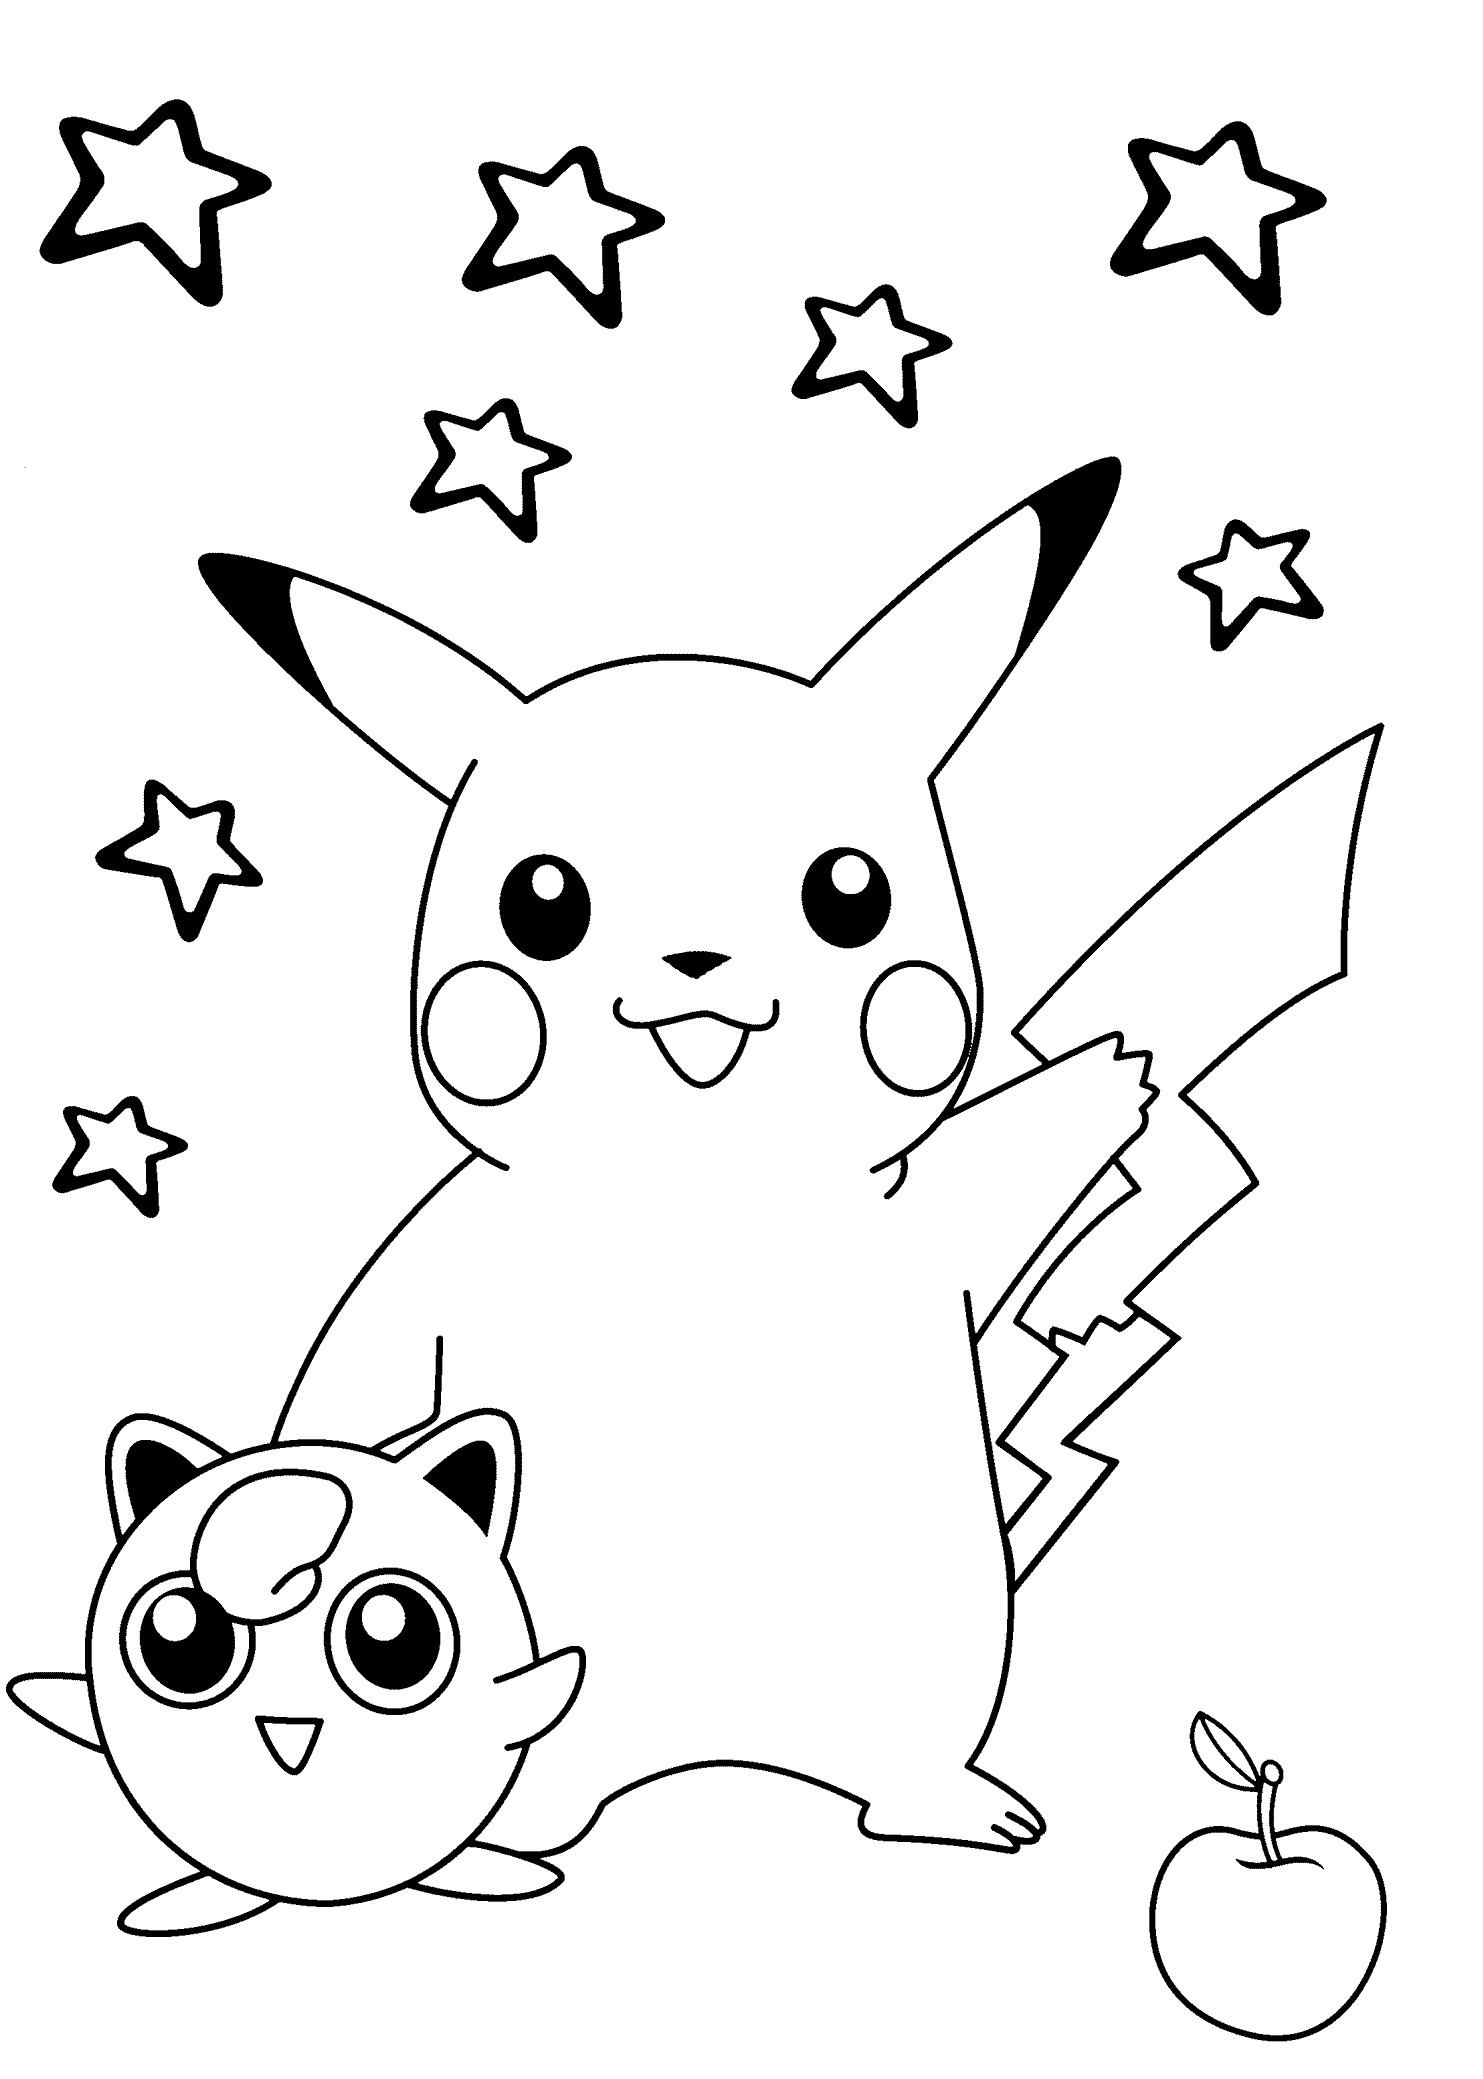 Smiling Pokemon coloring pages for kids printable free